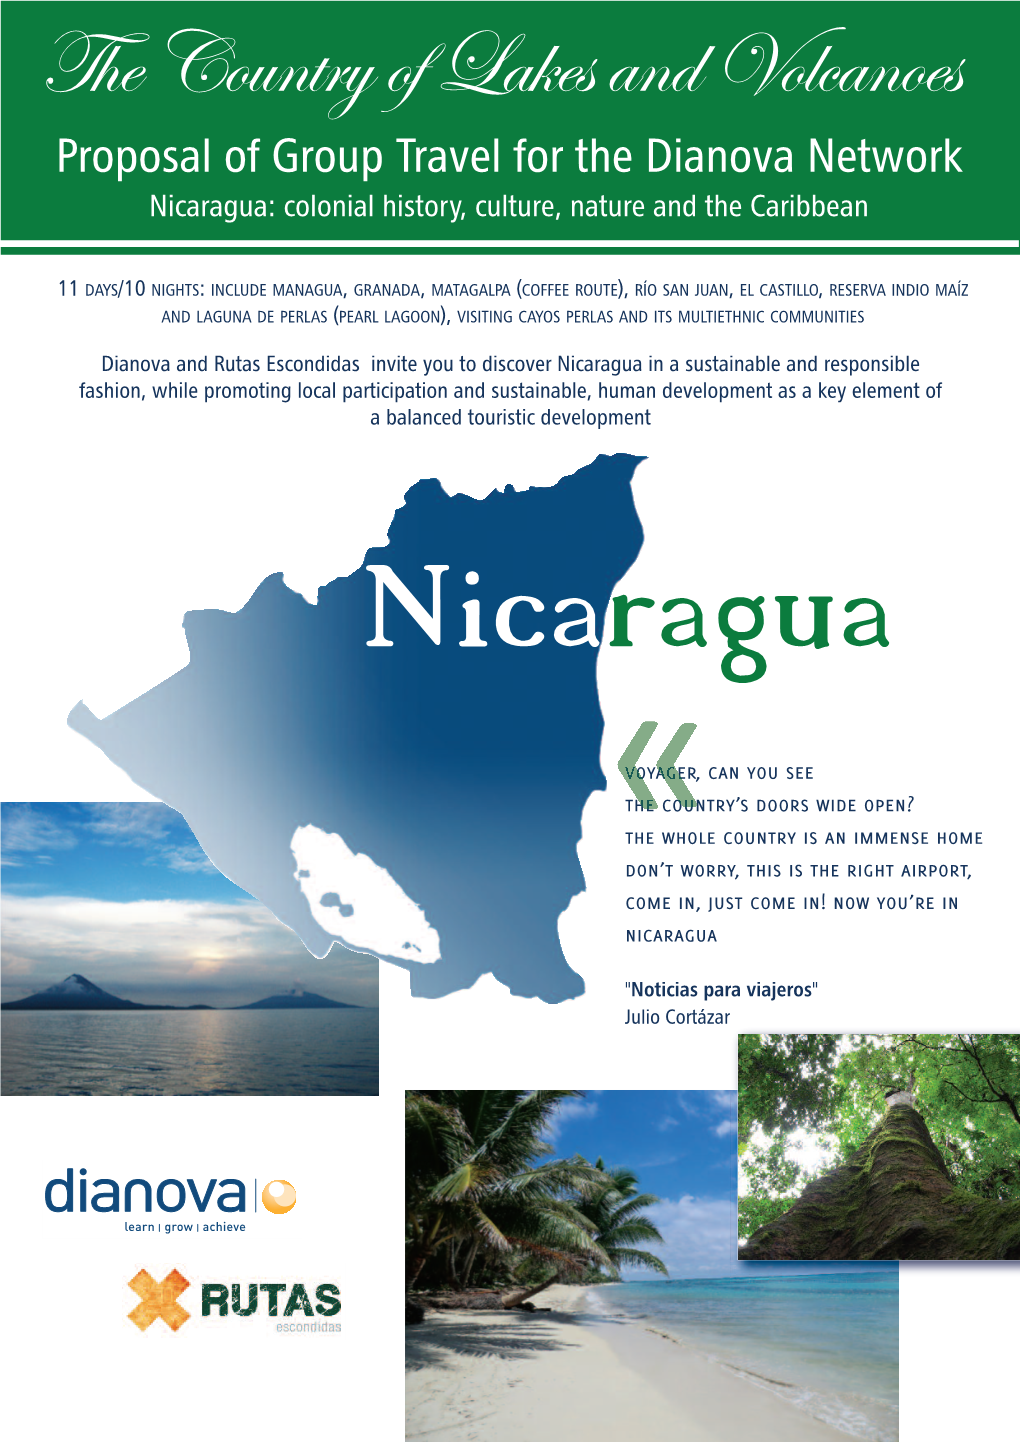 Proposal of Group Travel for the Dianova Network Nicaragua: Colonial History, Culture, Nature and the Caribbean